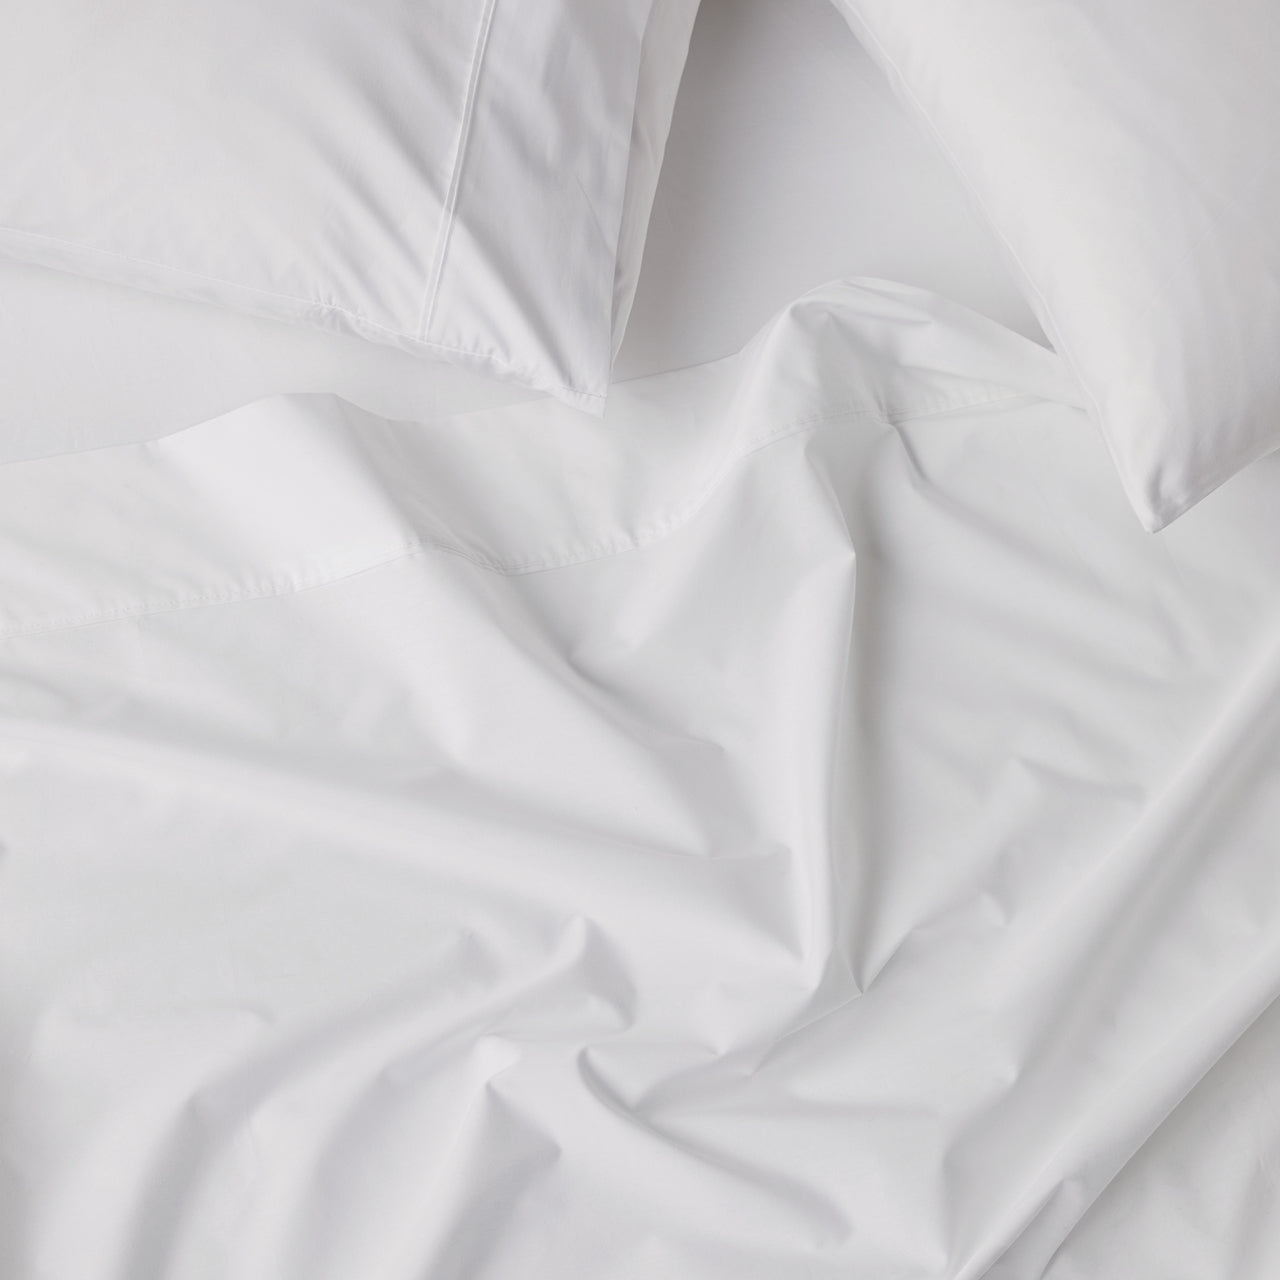 Close up shot of Premium Percale White Sheets